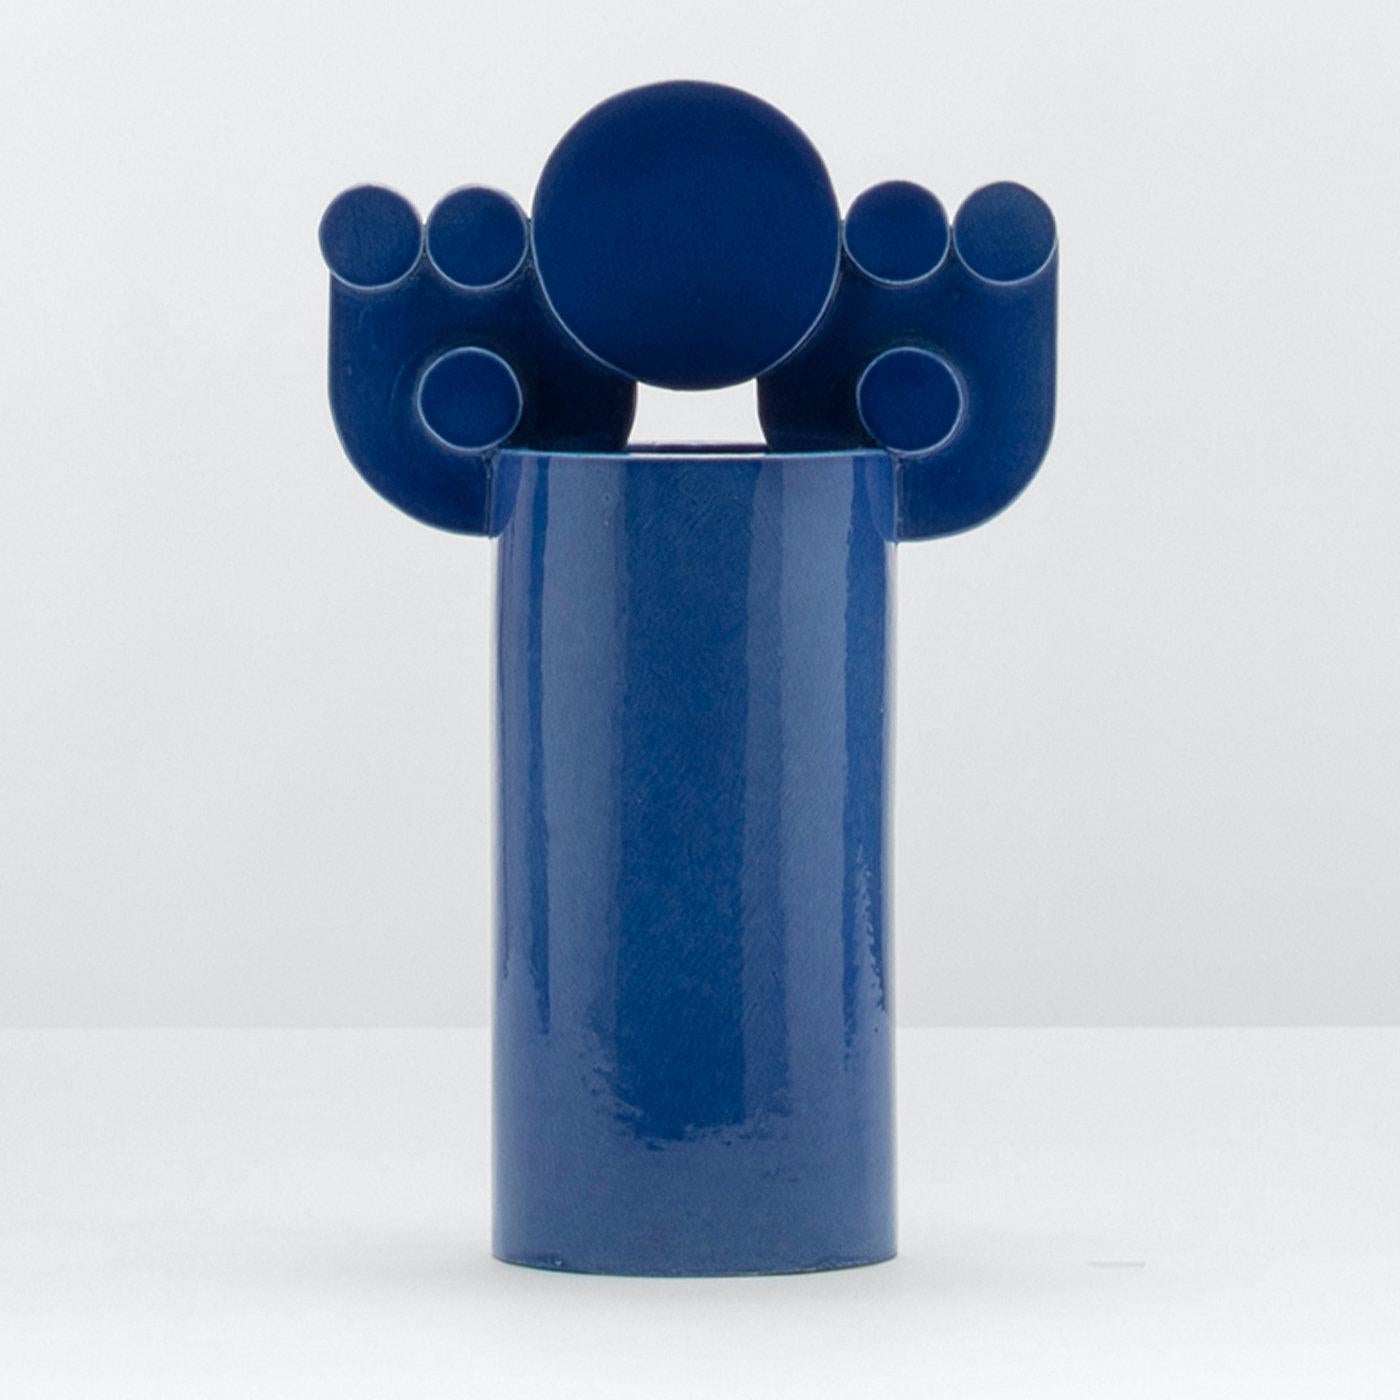 Inspired by the movement of waves hitting the shore and disappearing in the sand, this cobalt blue vase is an abstract transposition that plays with the balance of geometries. The design belongs to the Bubble Family Collection, a series celebrating